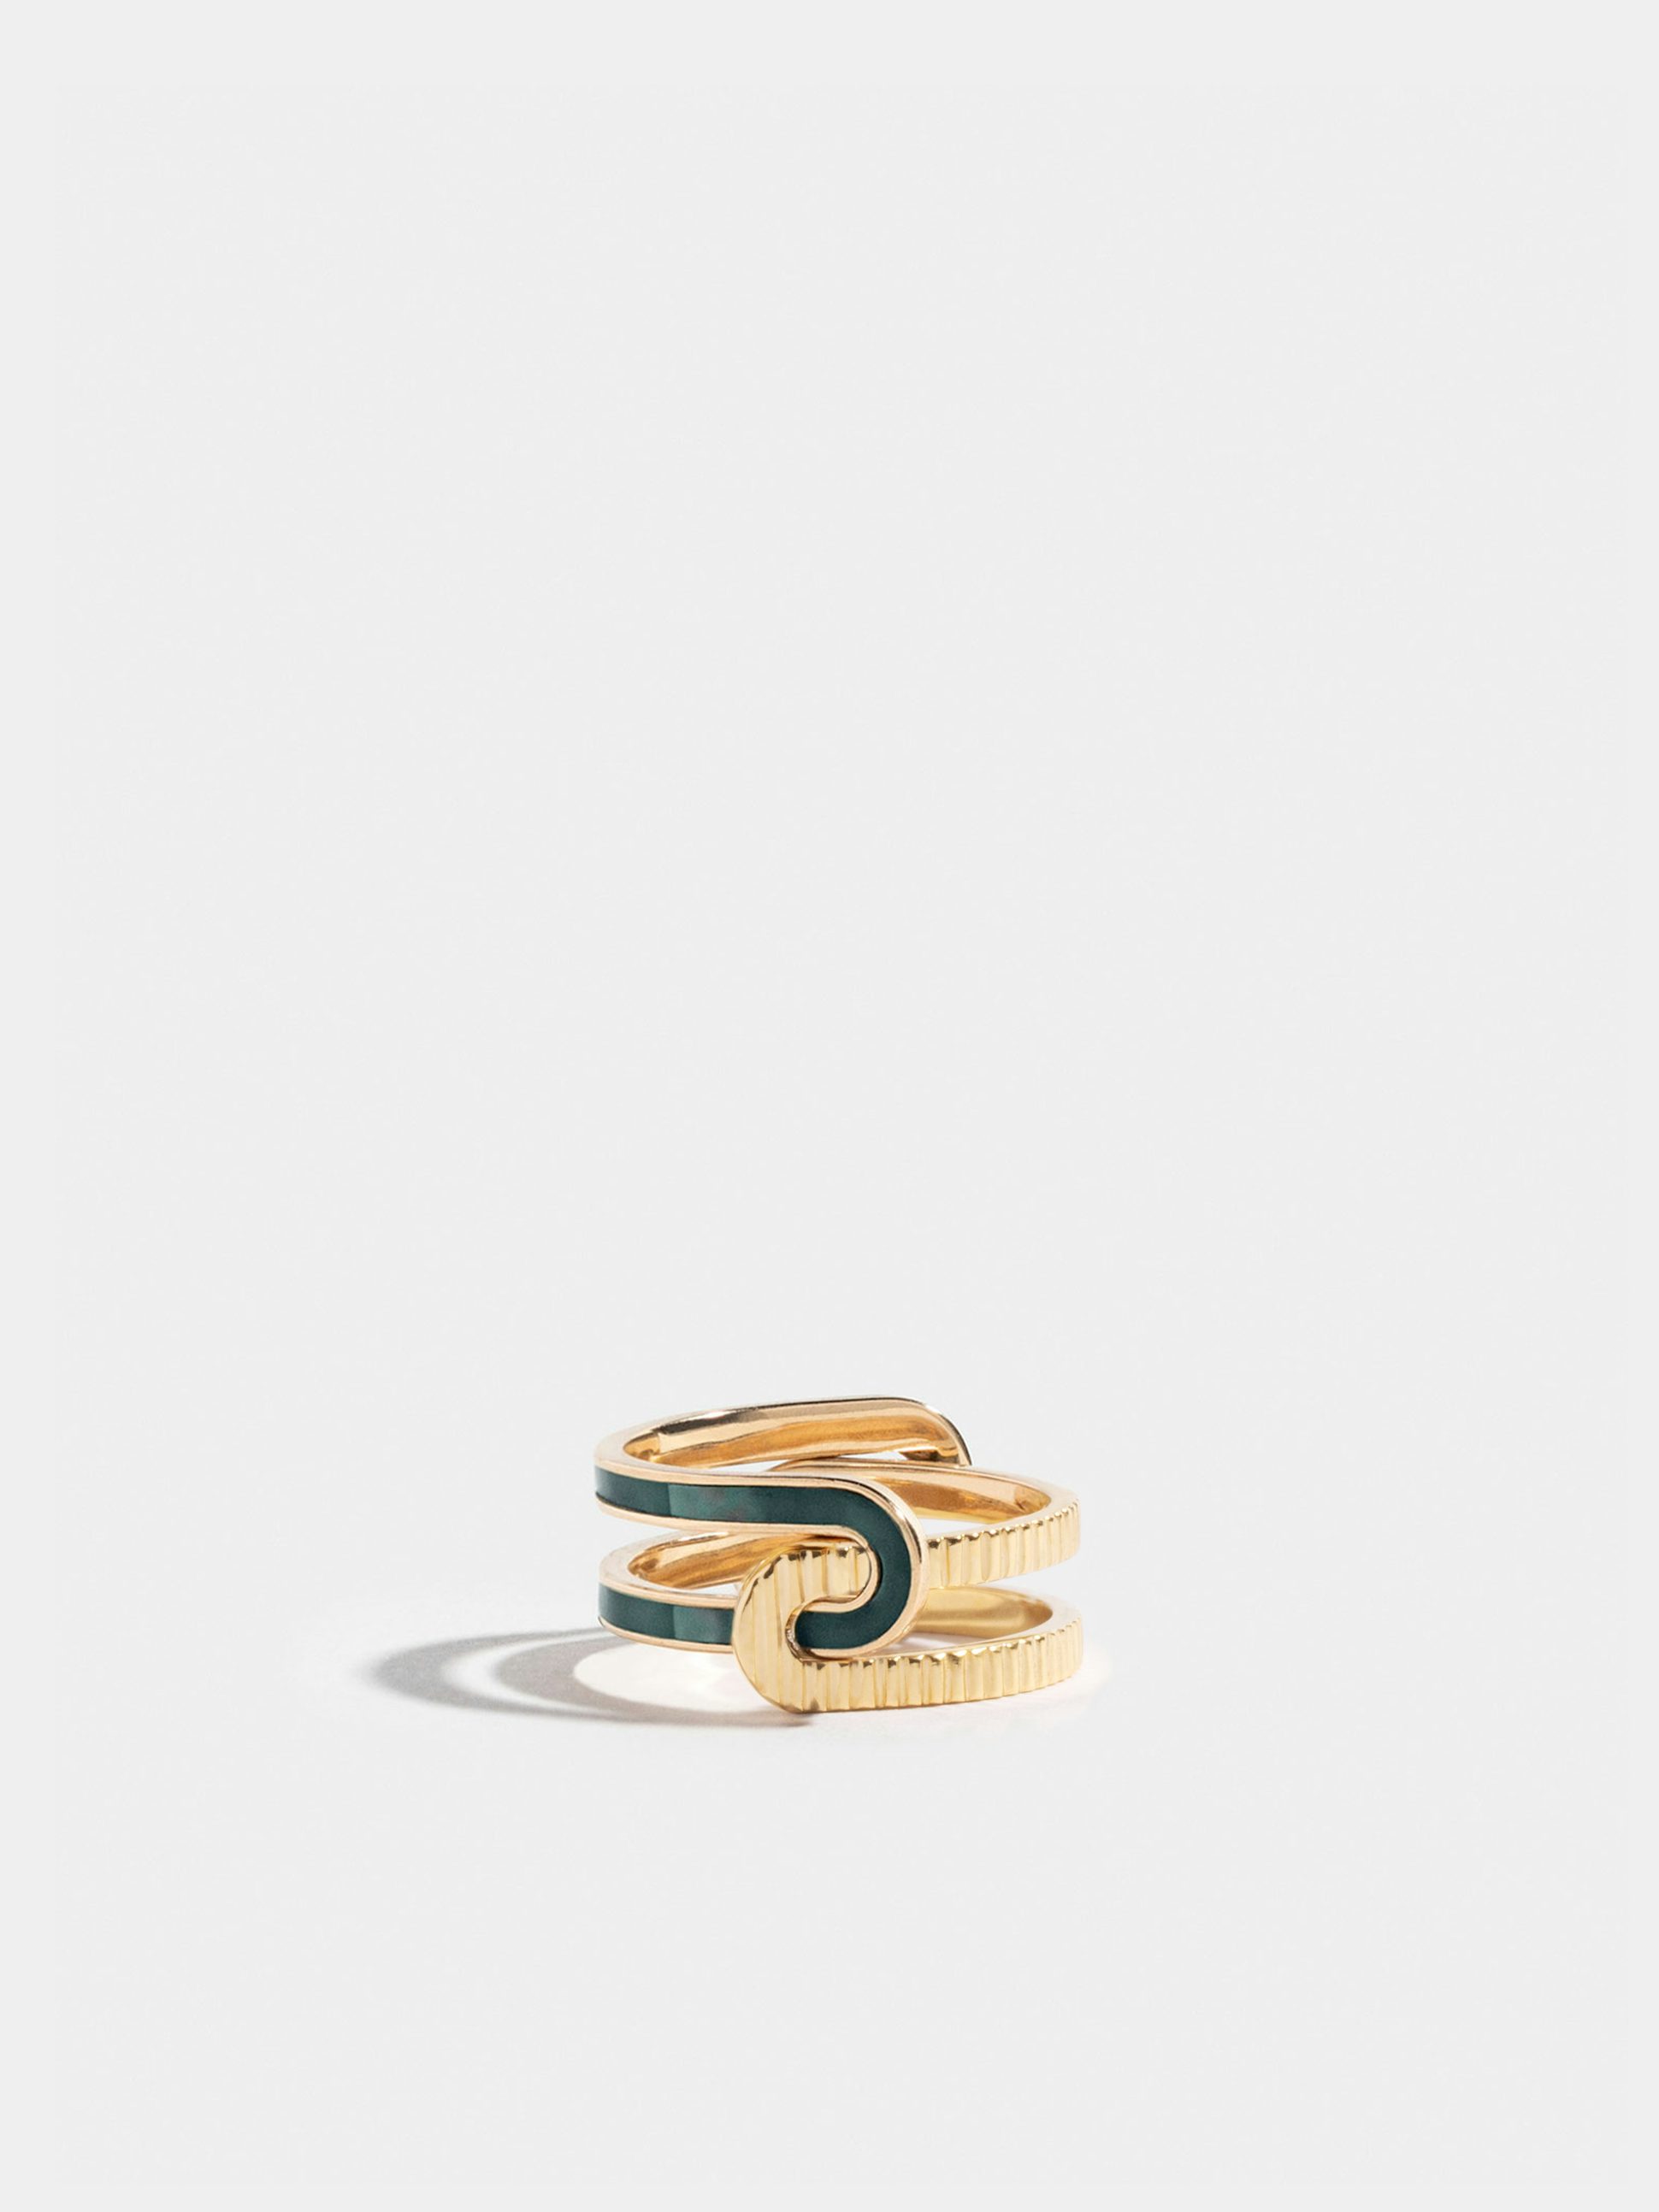 Étreintes simple ring green mother of pearl and ridges